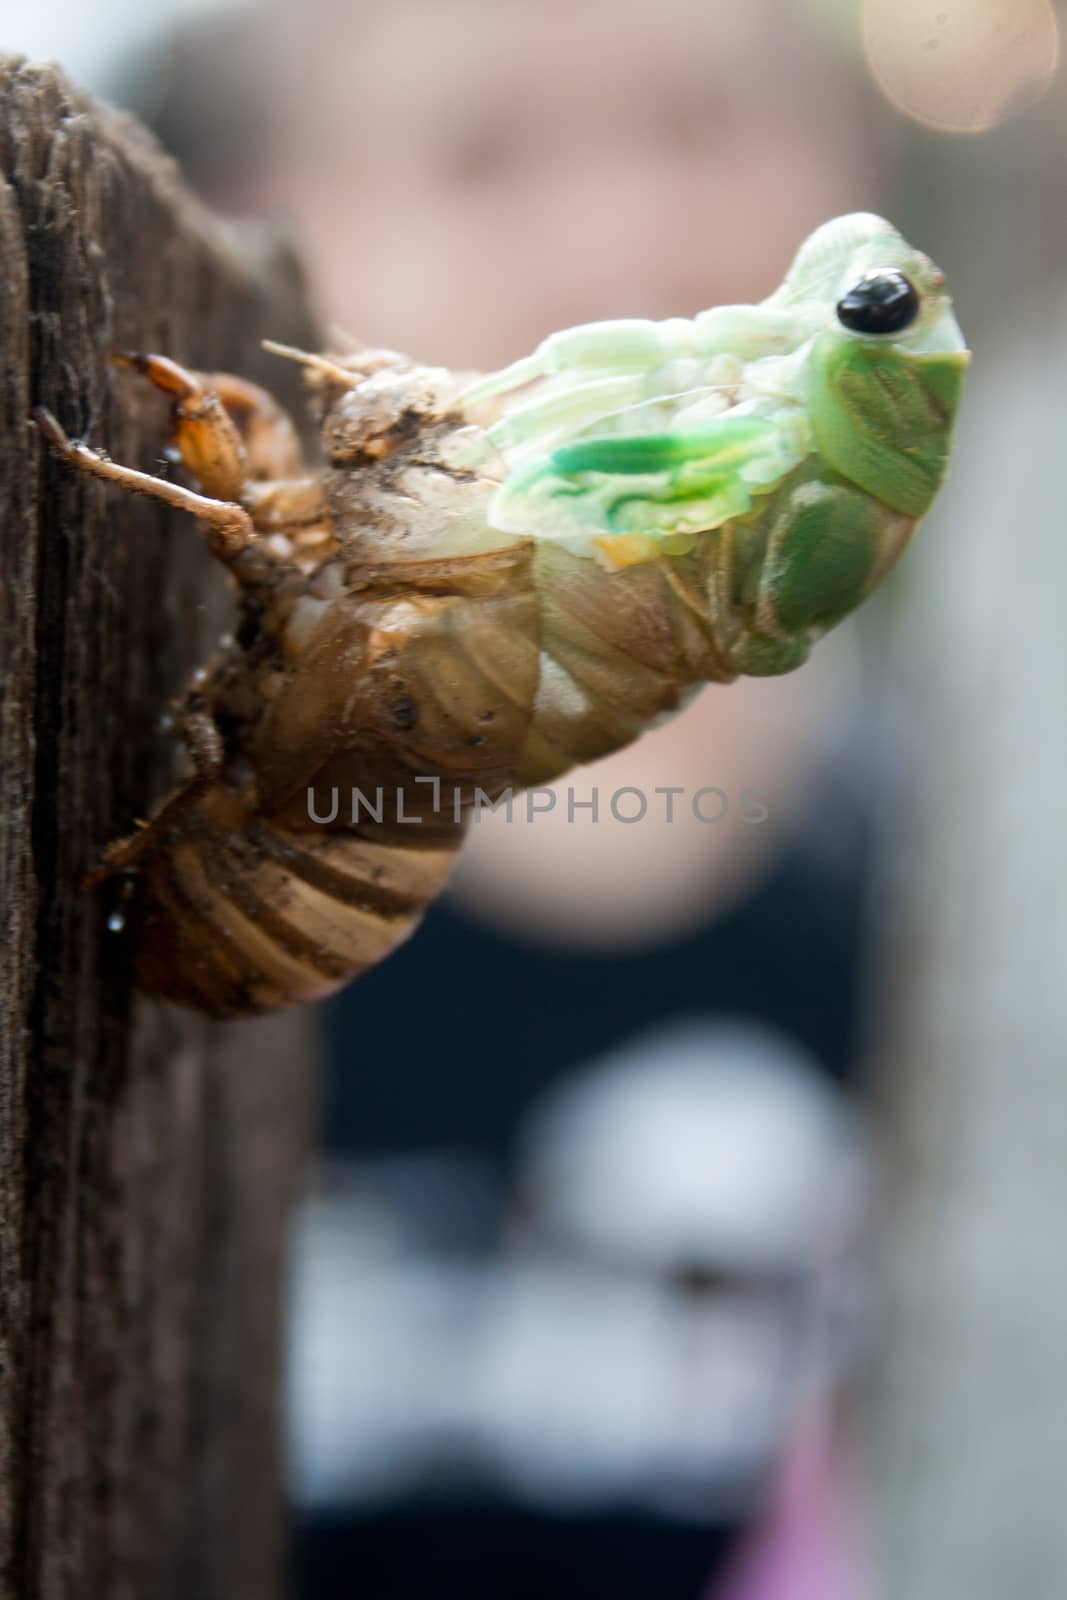 A cicada nymph molting from its exoskeleton as it becomes and adult. 